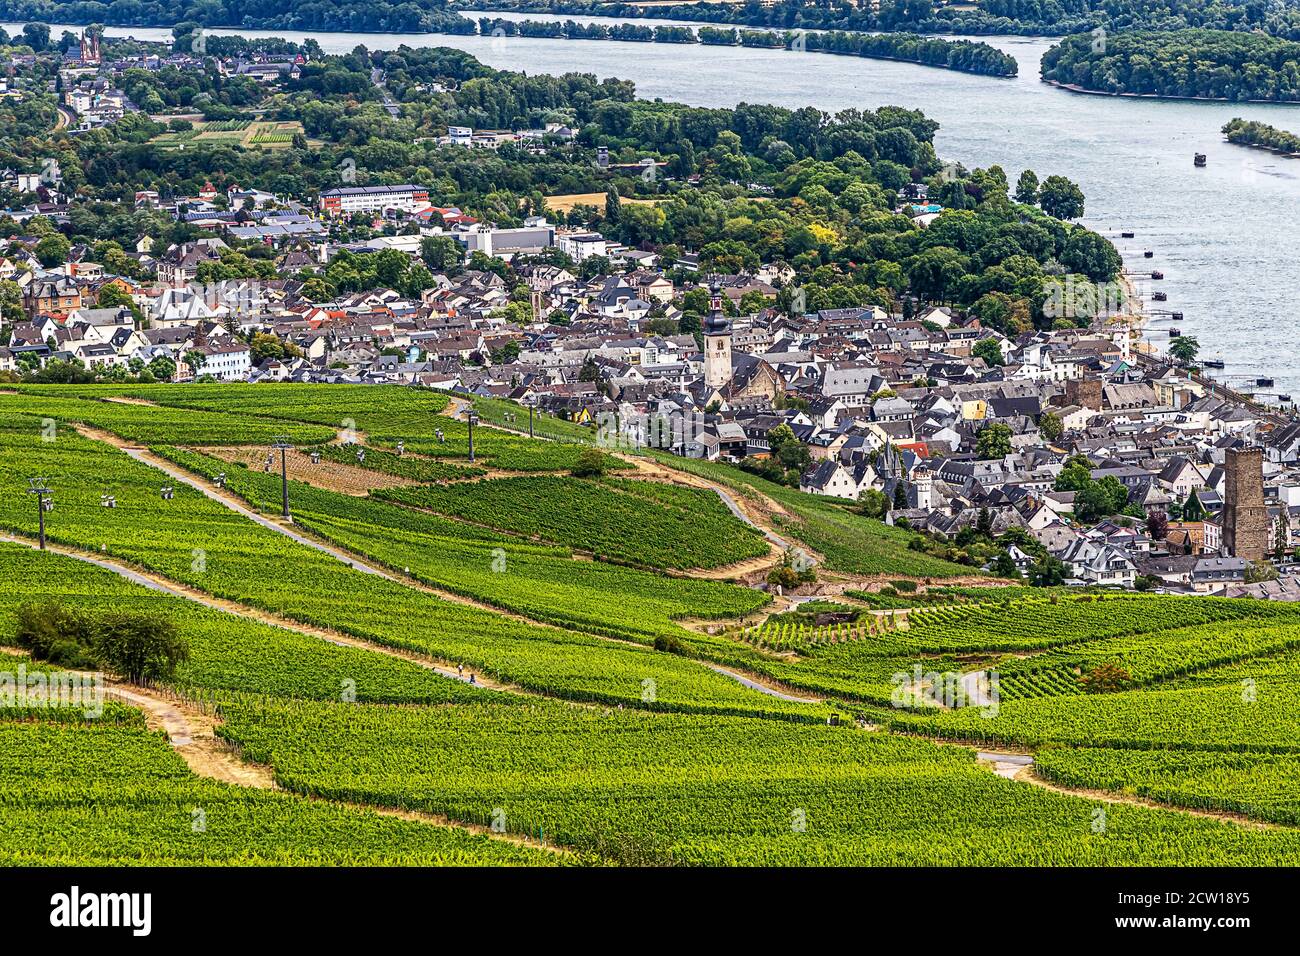 Picturesque winemaking town and vineyards on the banks of the Rhine - Rudesheim am Rhein, Upper Middle Rhine Valley, Germany Stock Photo